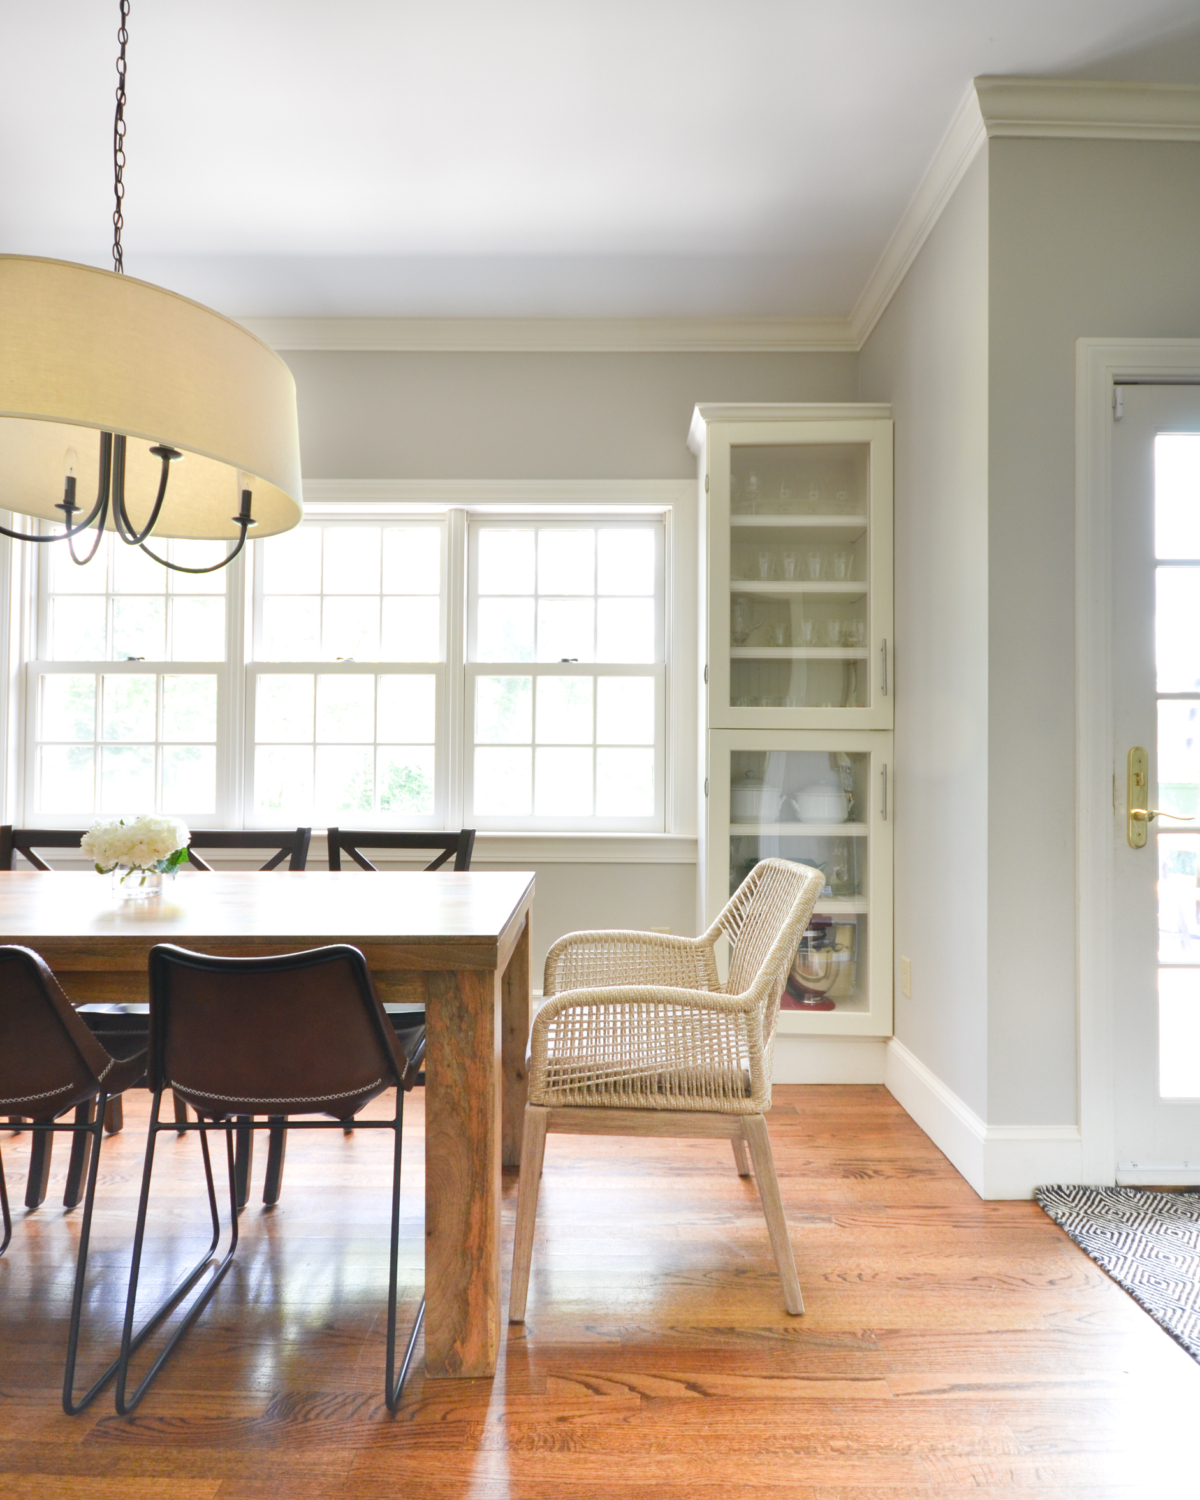 Beige rope chairs are a stunning addition to this chic yet family friendly breakfast nook makeover.